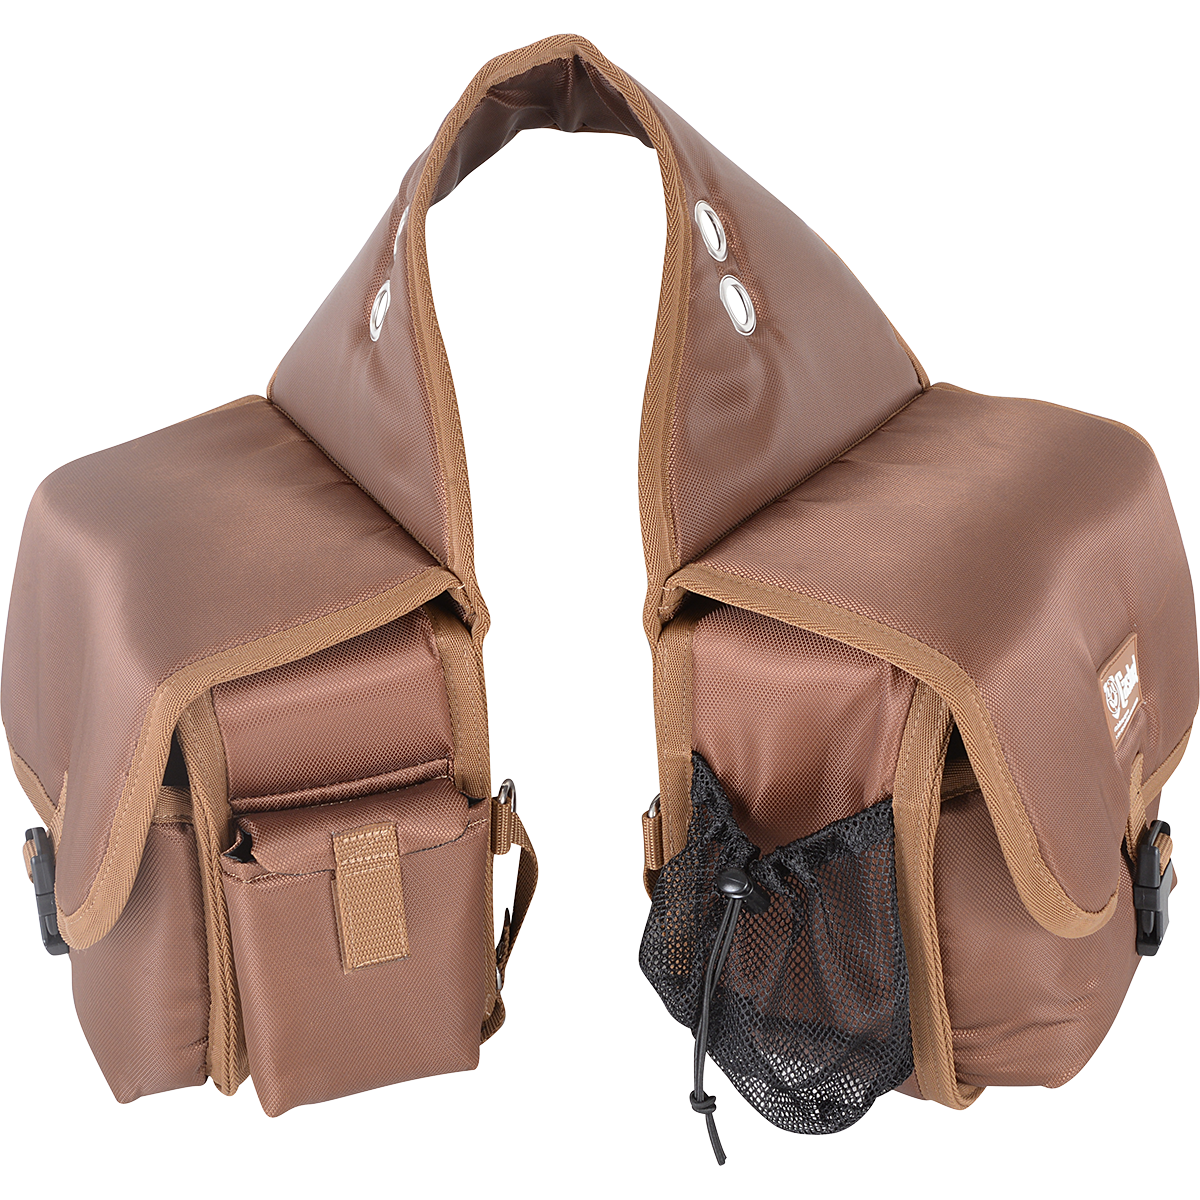 Deluxe Saddle Bag By Cashel